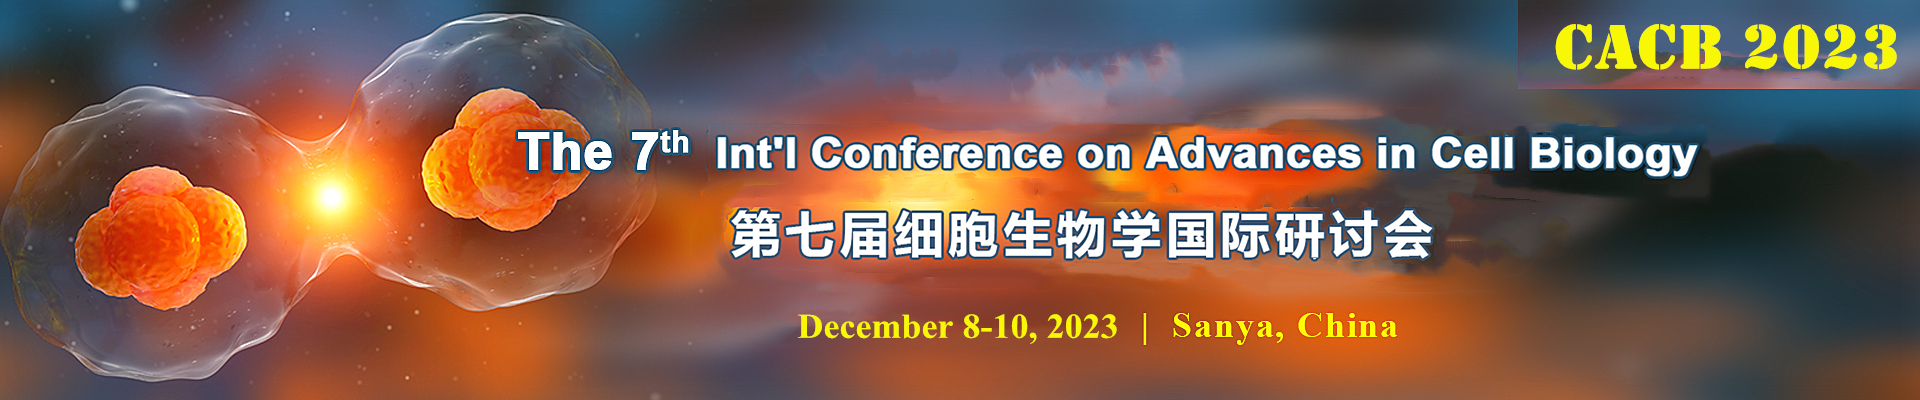 The 7th Int'l Conference on Advances in Cell Biology (CACB 2023)